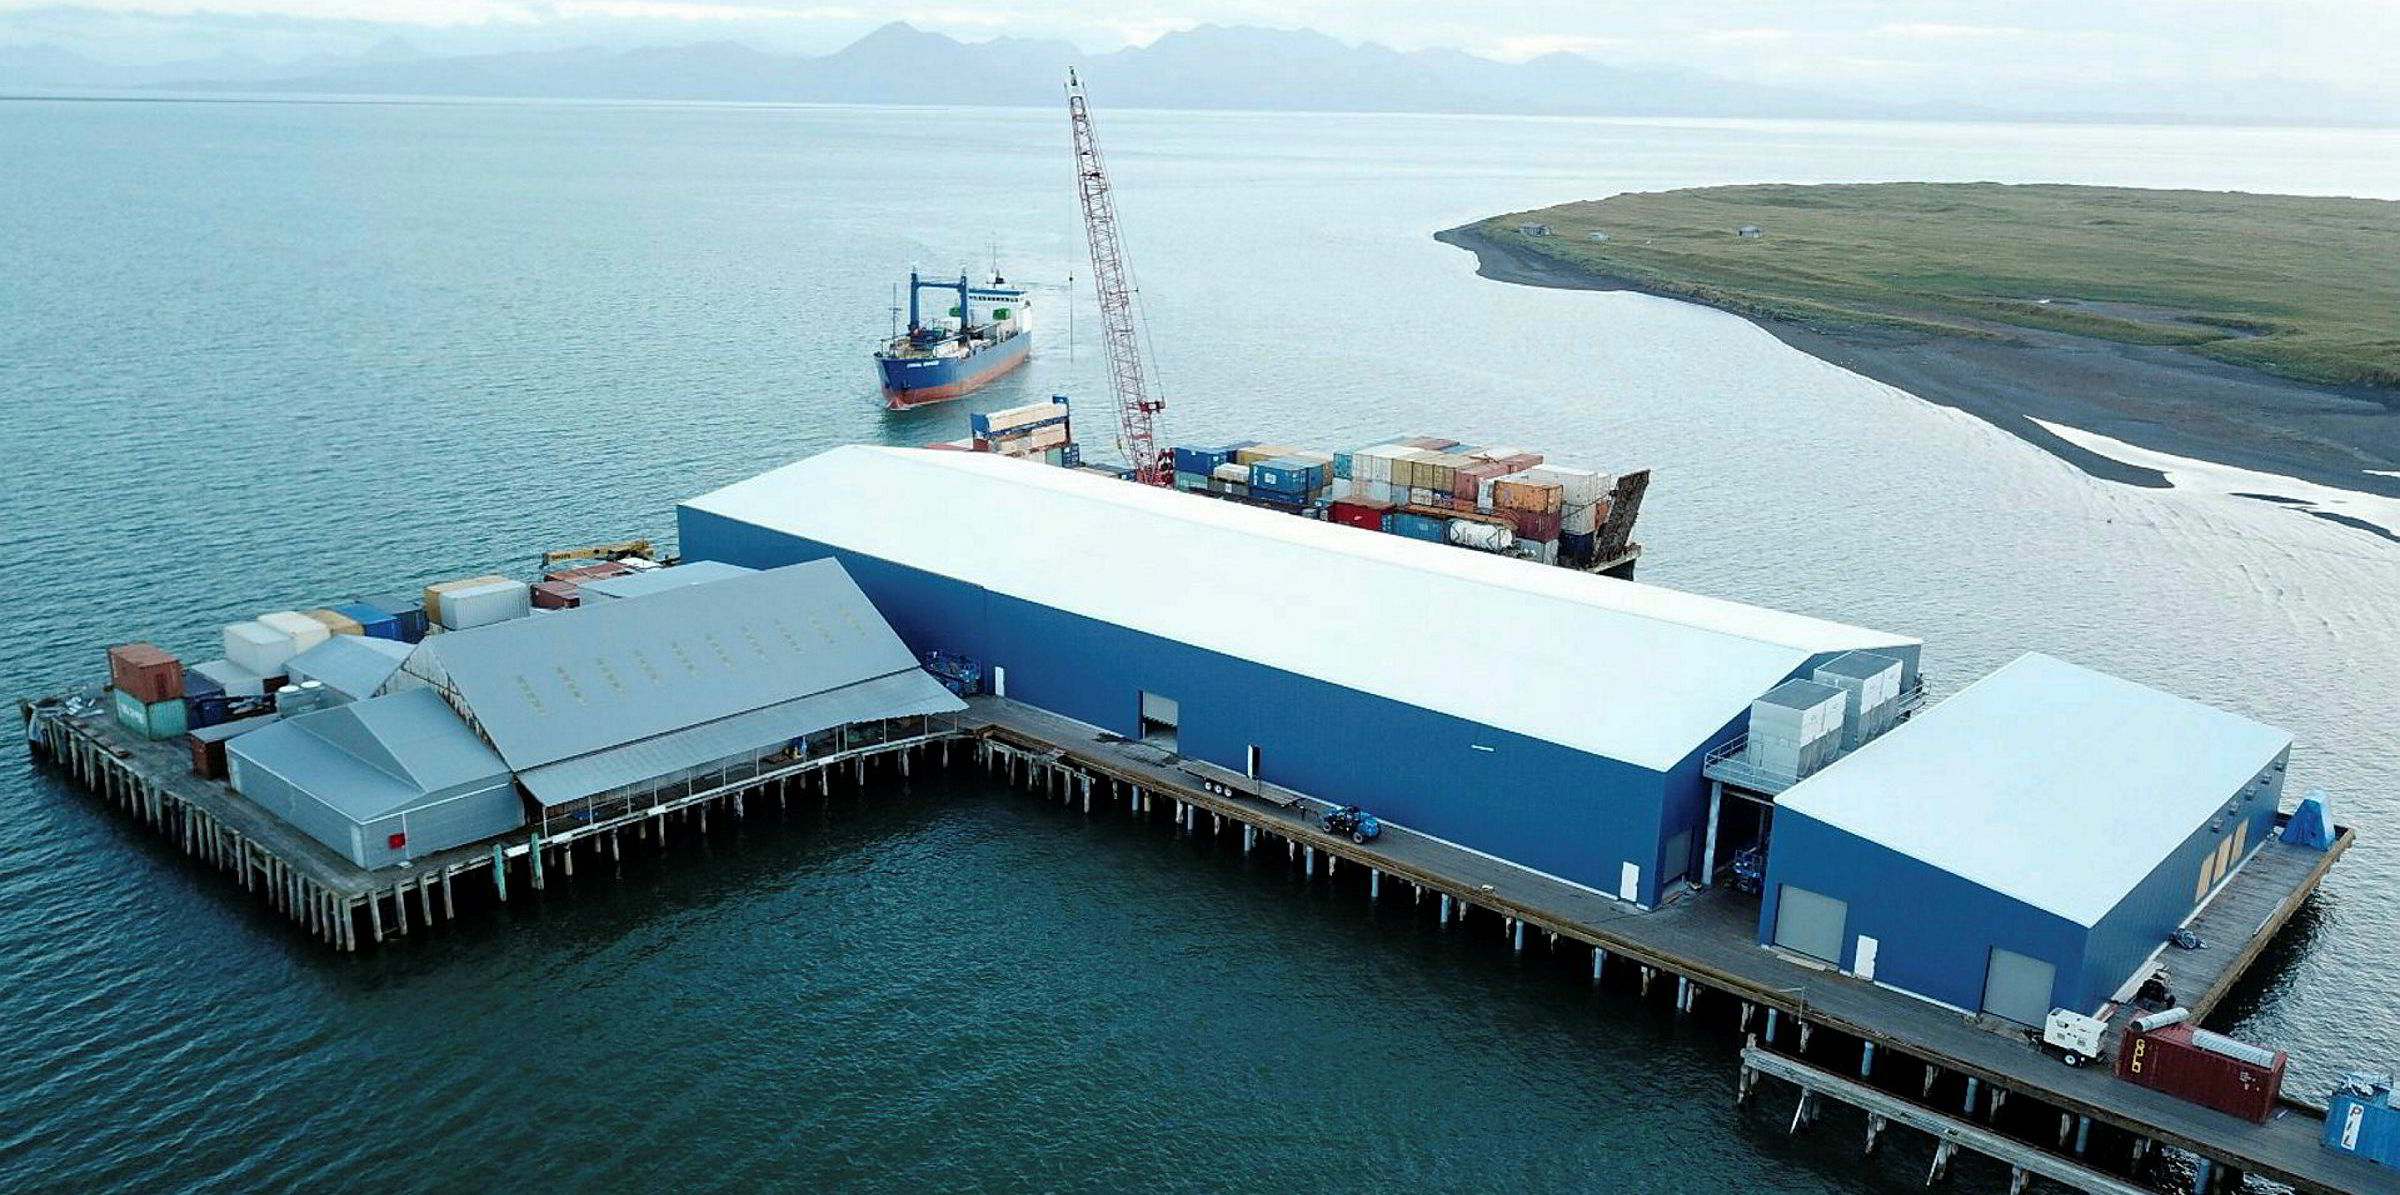 Trident Seafoods will overhaul Alaska operations, plans to sell 4 shoreside  - Maritime News - gCaptain Forum